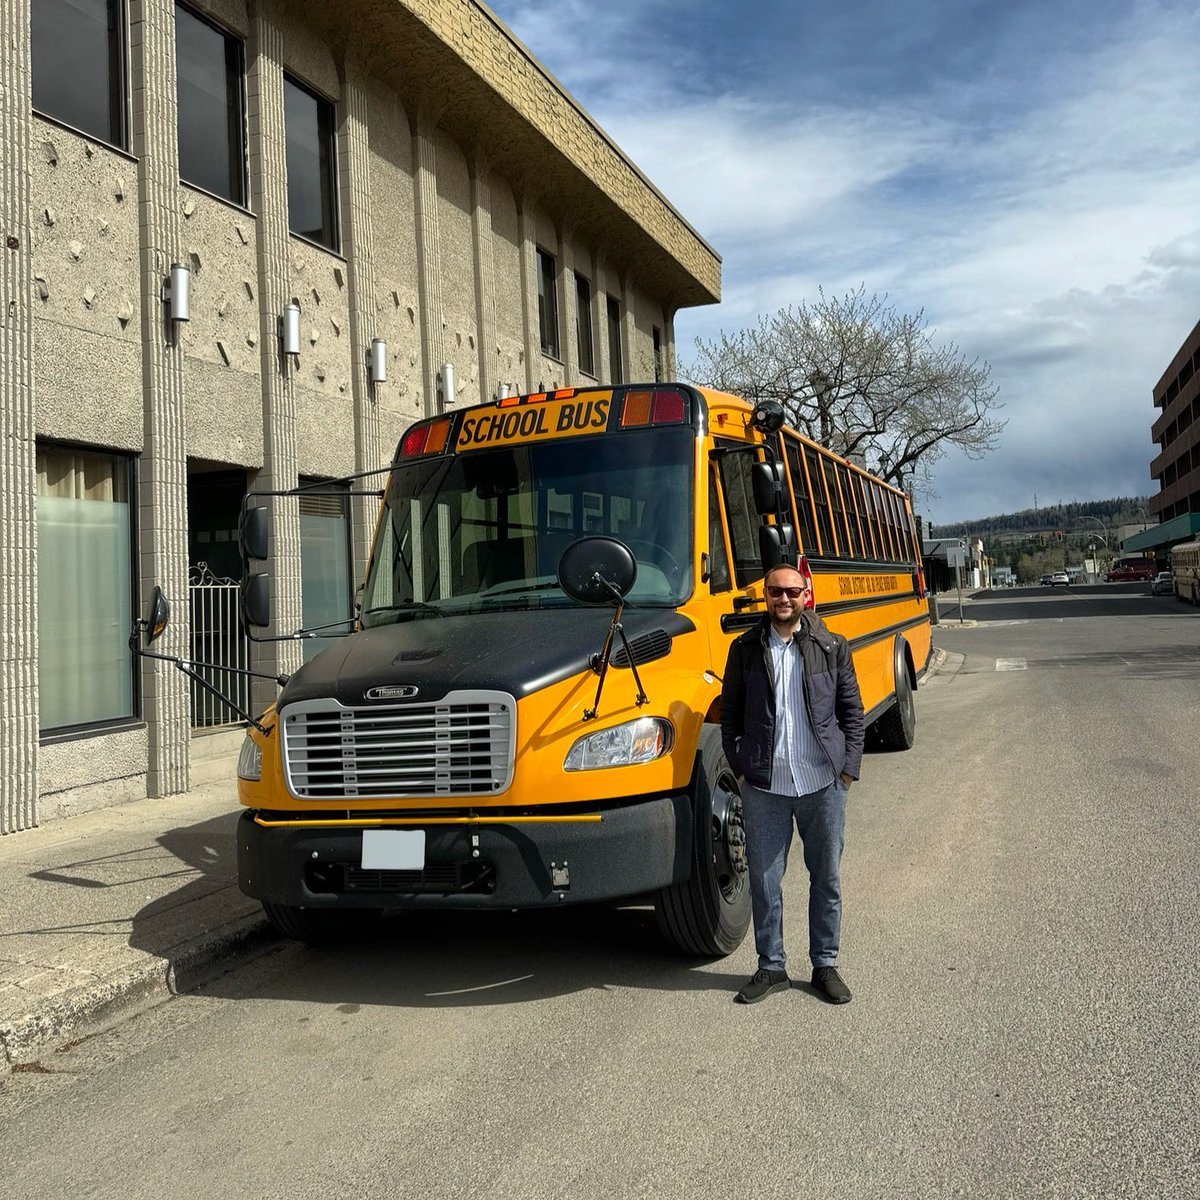 Why do we all love these yellow buses so much? 🚌

#PrinceGeorge #PrinceGeorgeBC #BritishColumbia #Canada #Kanada #YellowBus #SchoolBus